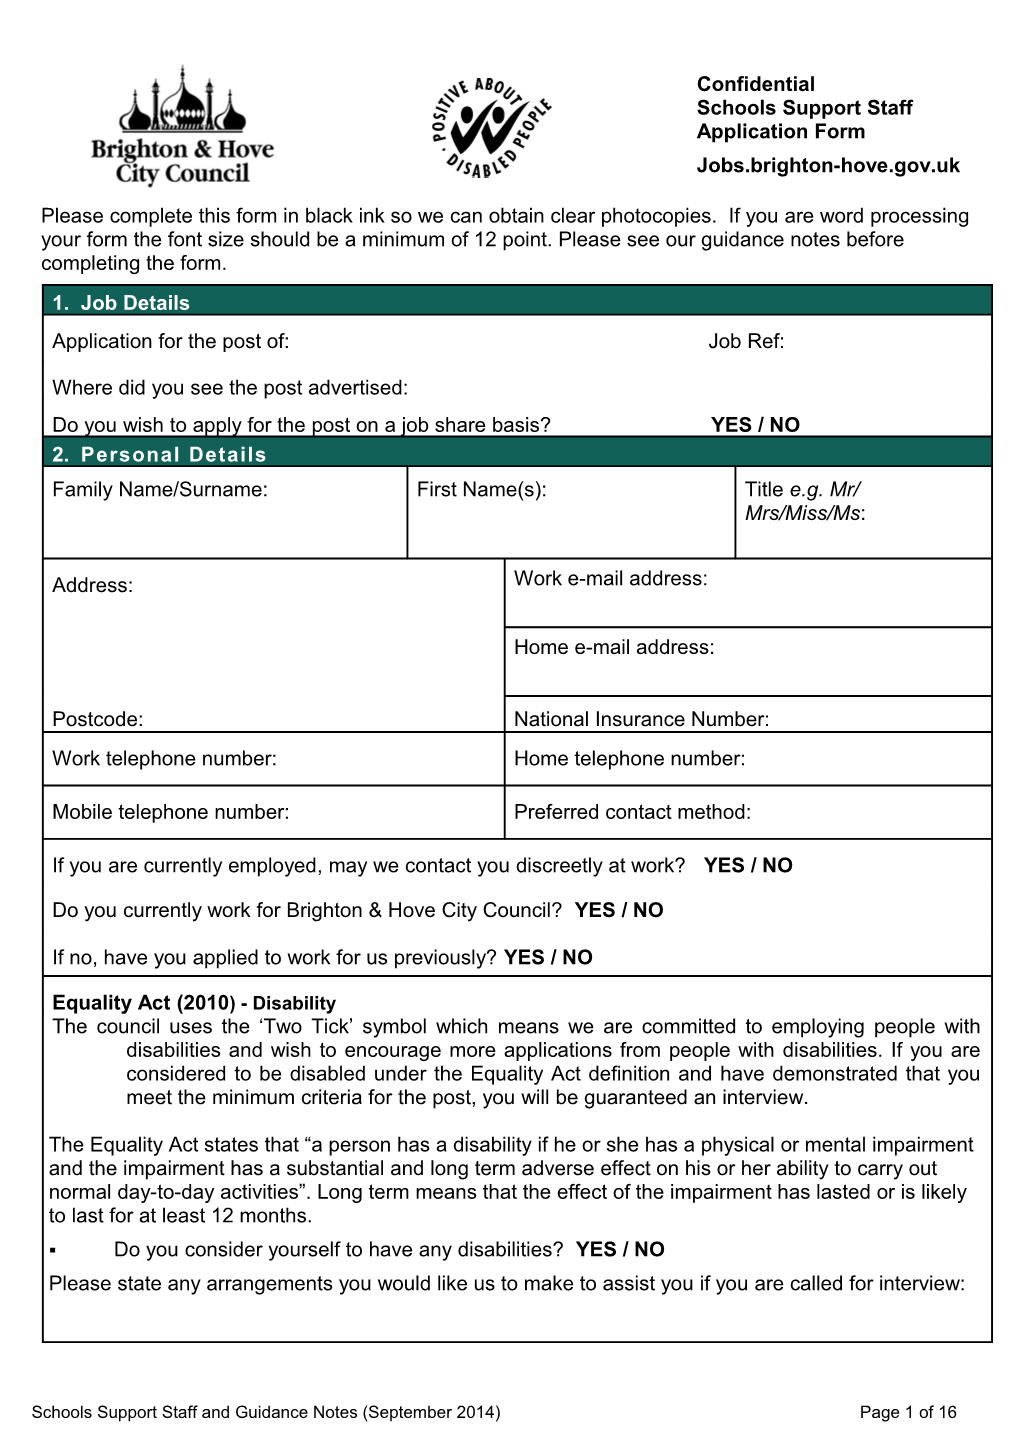 Schools Support Application Form with RM Form and Guidance Notes